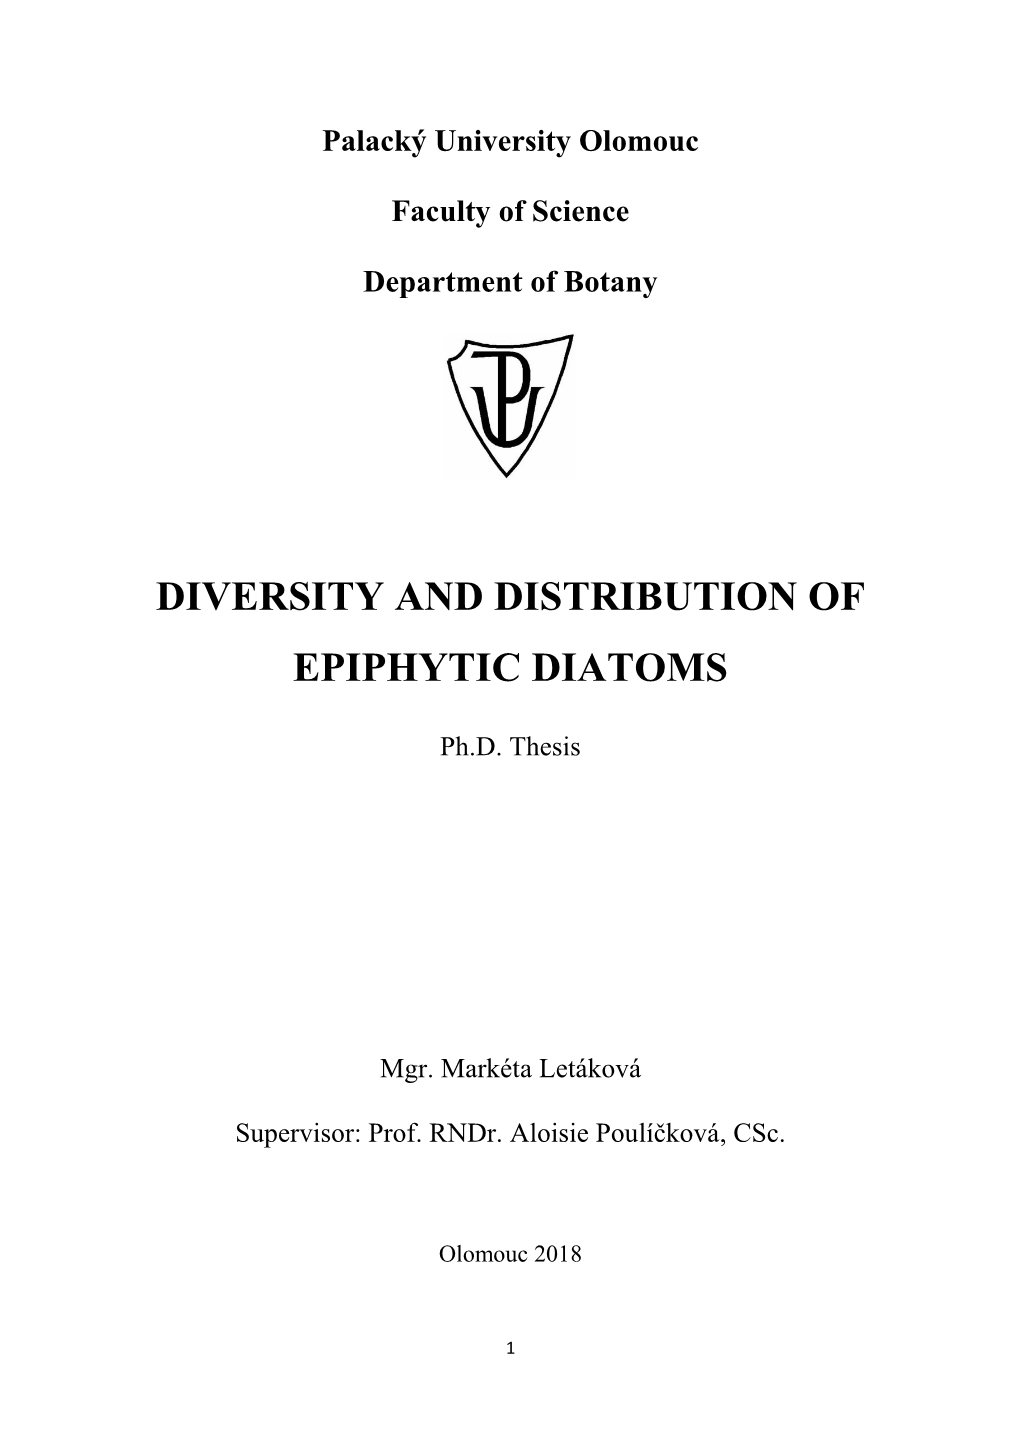 Diversity and Distribution of Epiphytic Diatoms